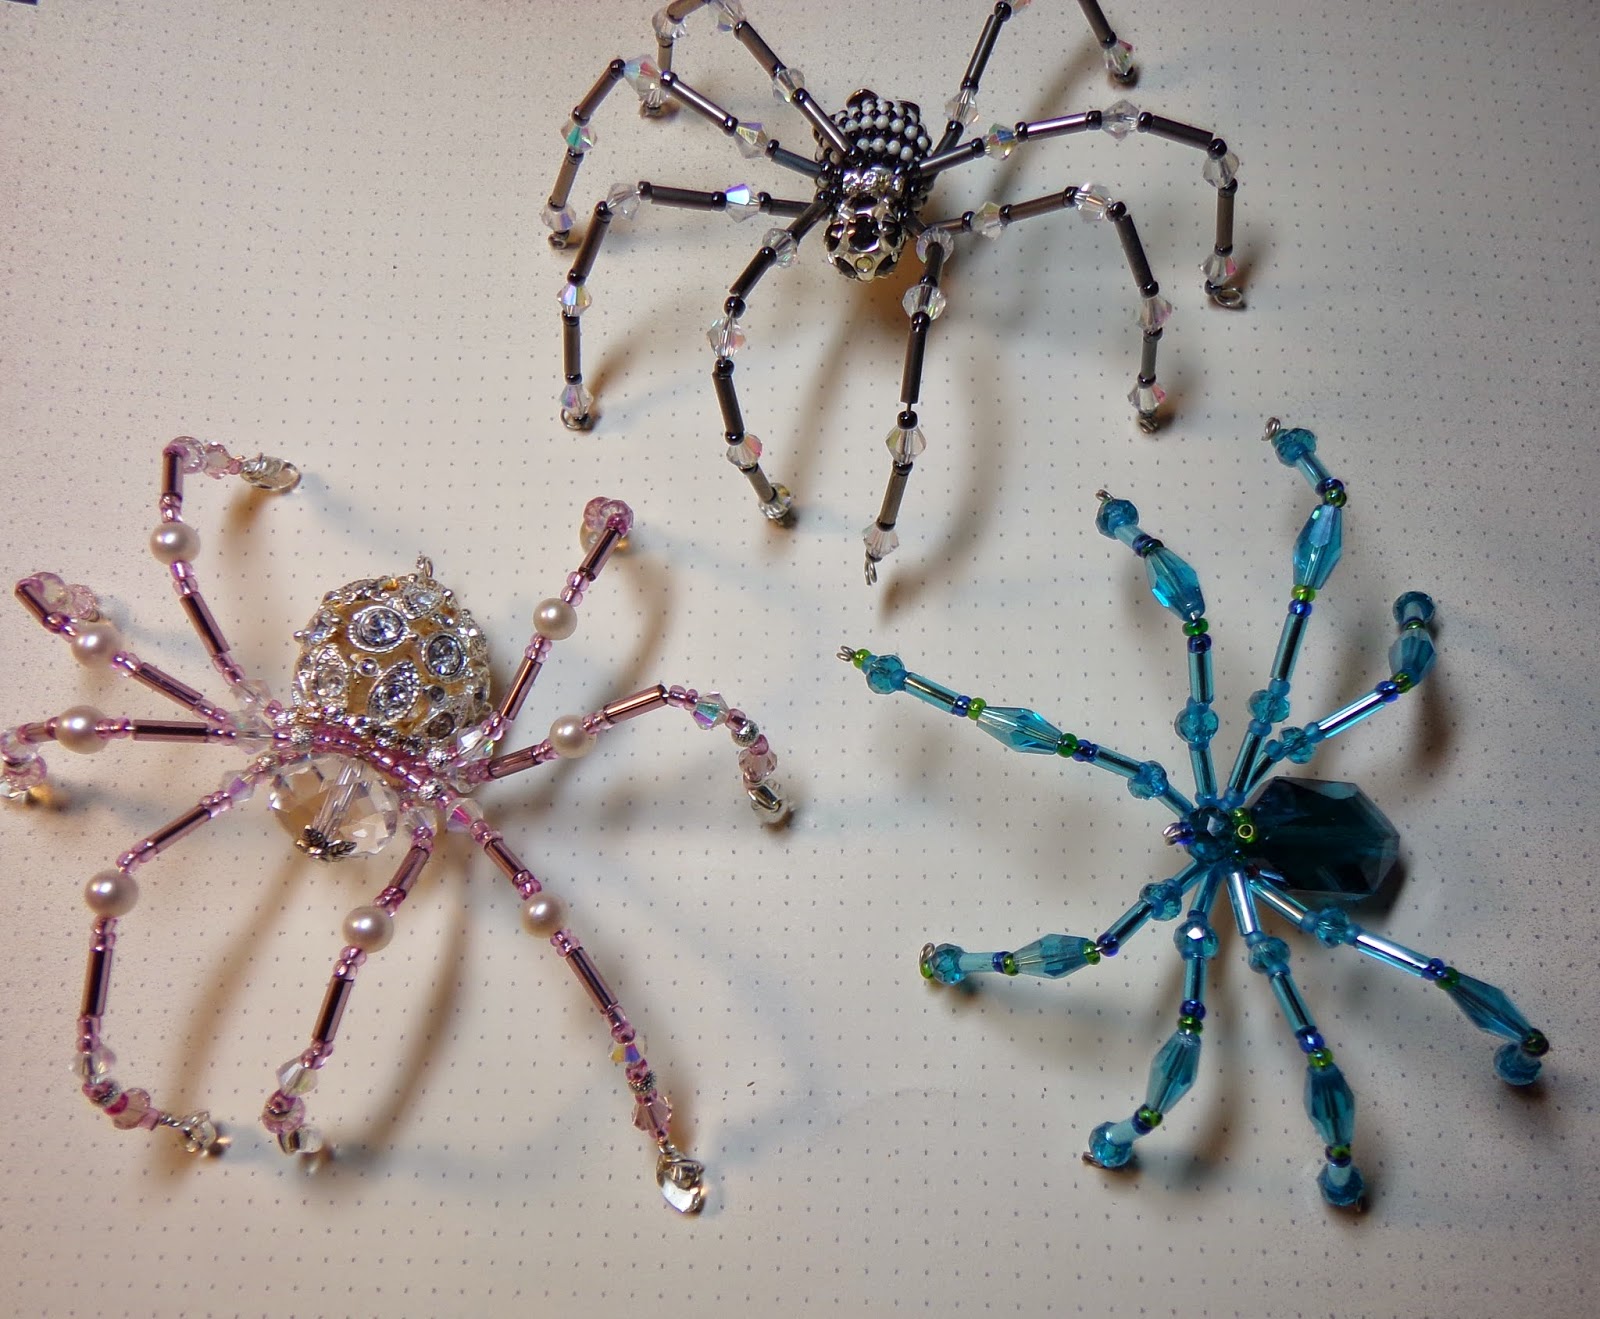 JuJu Crafts: Spiders made from Beads and Wire - in time for Halloween